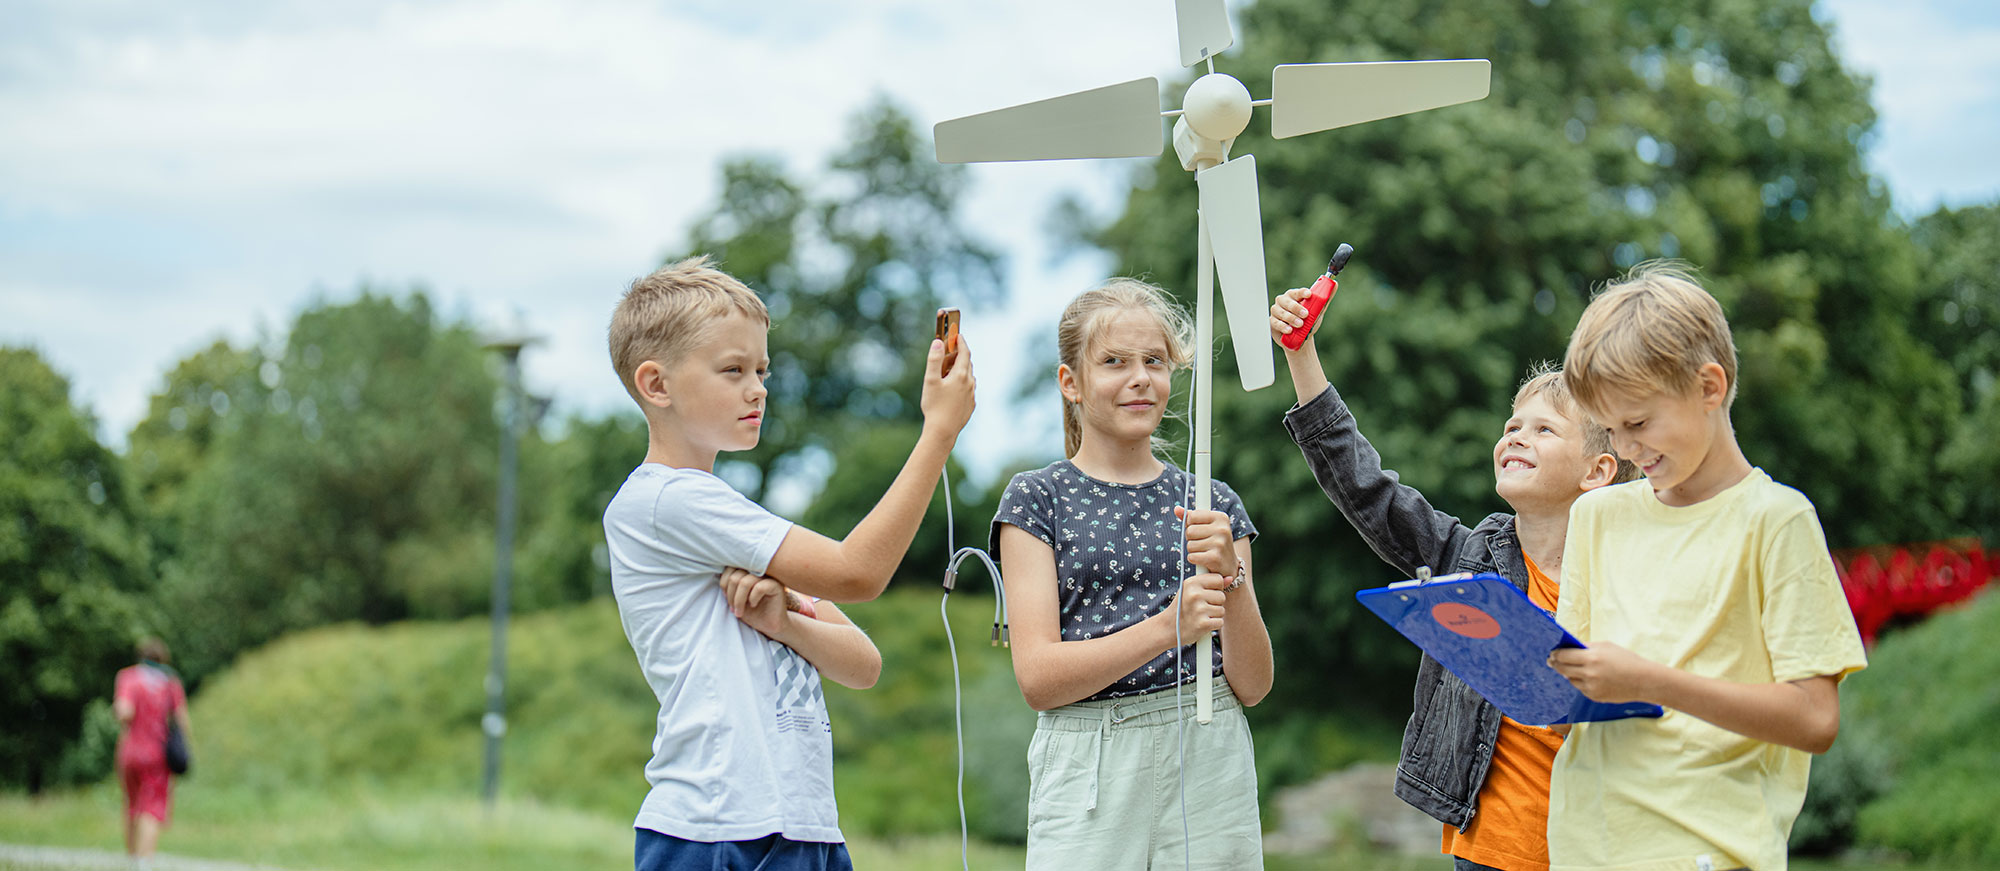 Outdoor learning increases students’ motivation and self-confidence